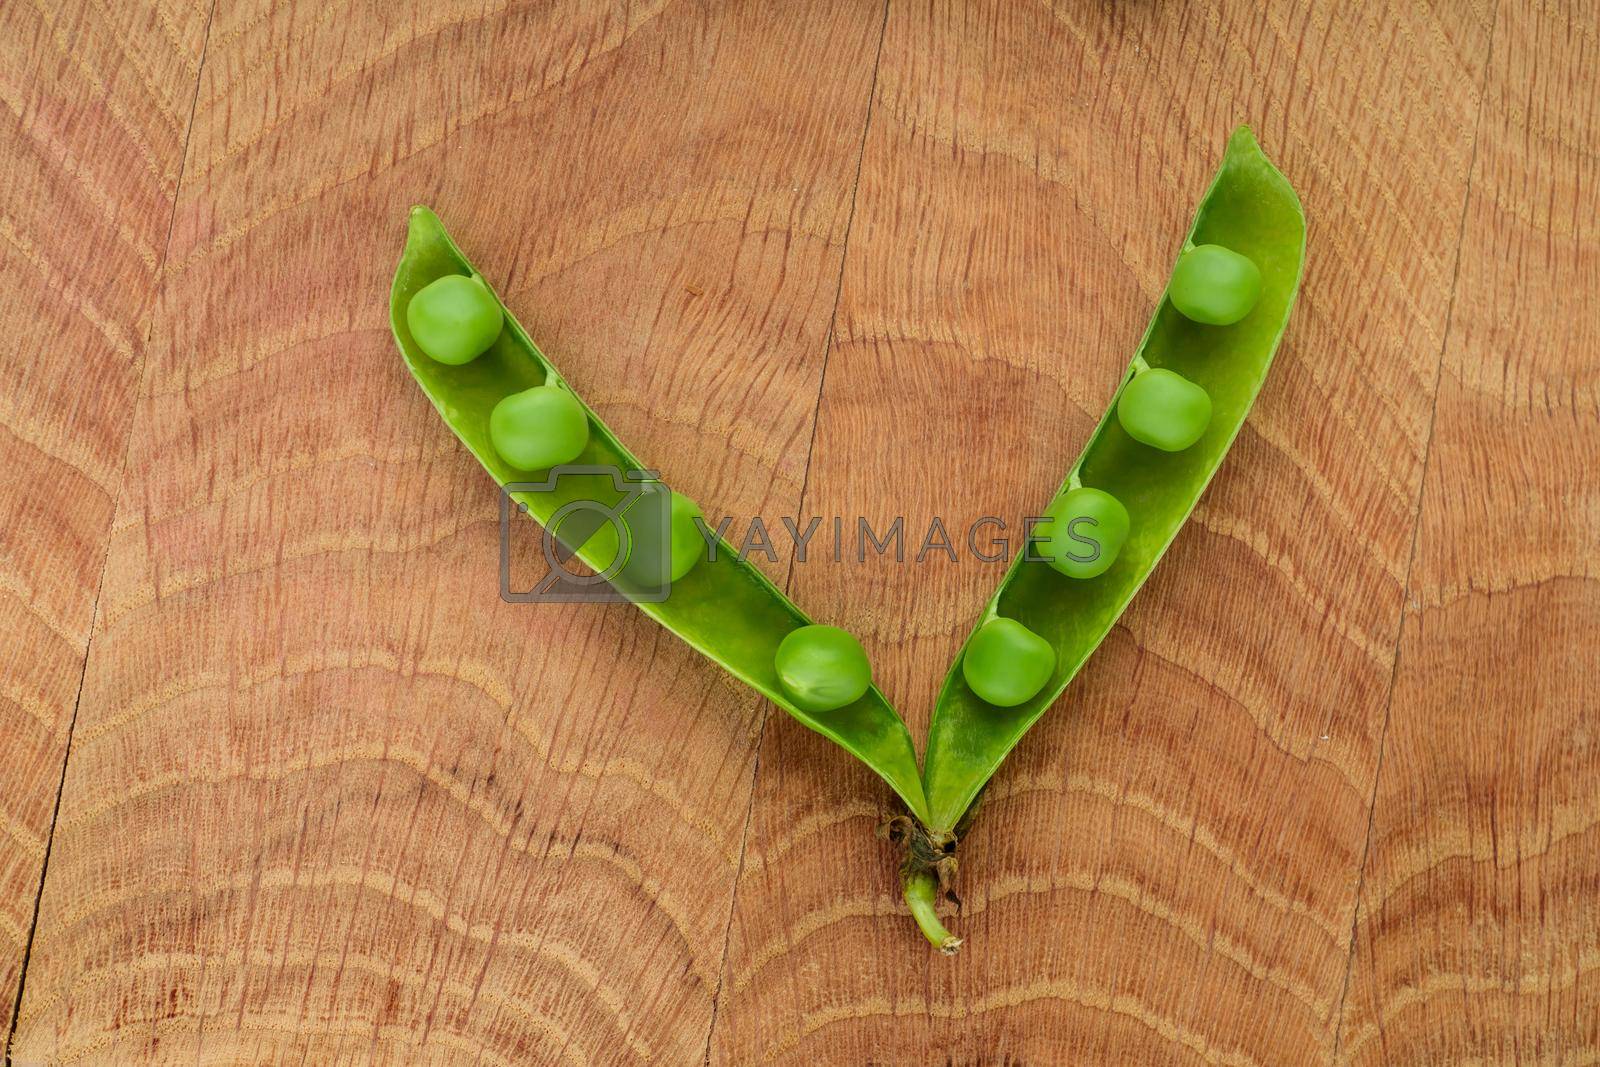 Royalty free image of One opened stitch of peas, with grains of peas on a wooden board by A_A